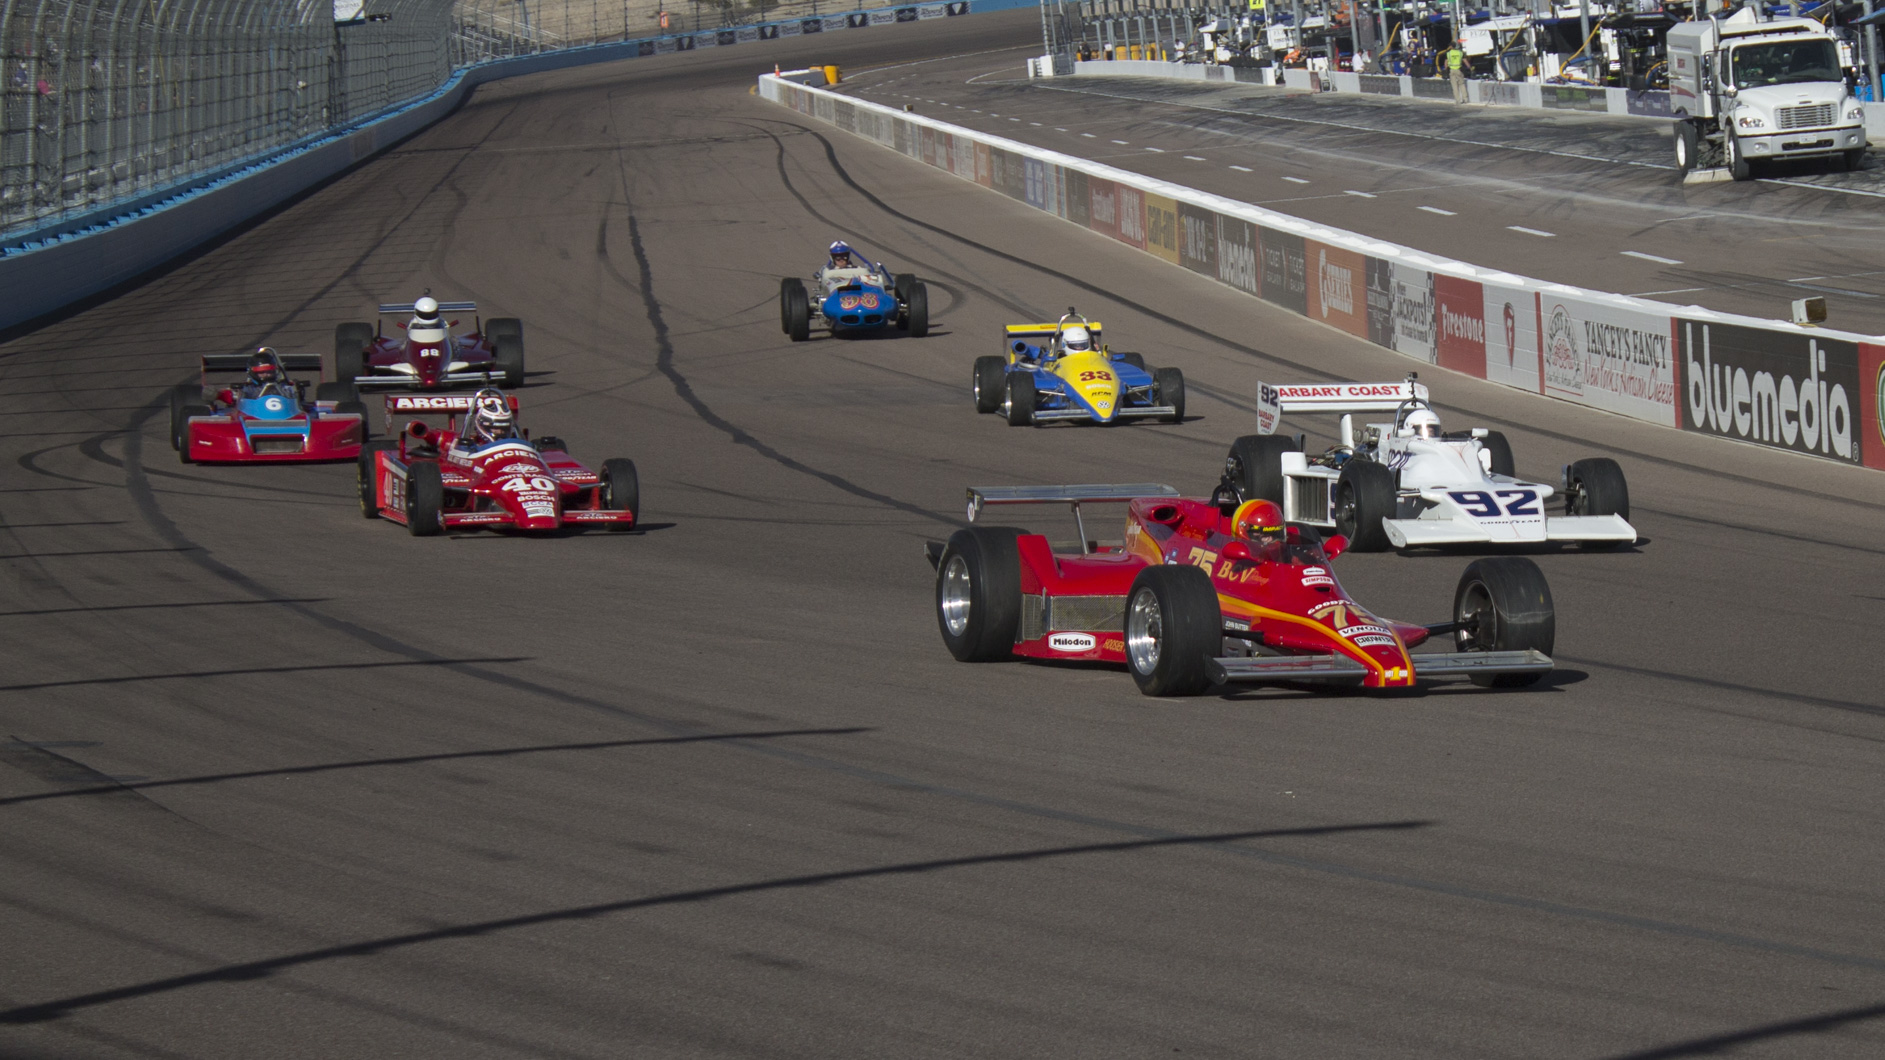 Car No. 75 leads other vintage racers down the straight at PIR | Nicole James photos